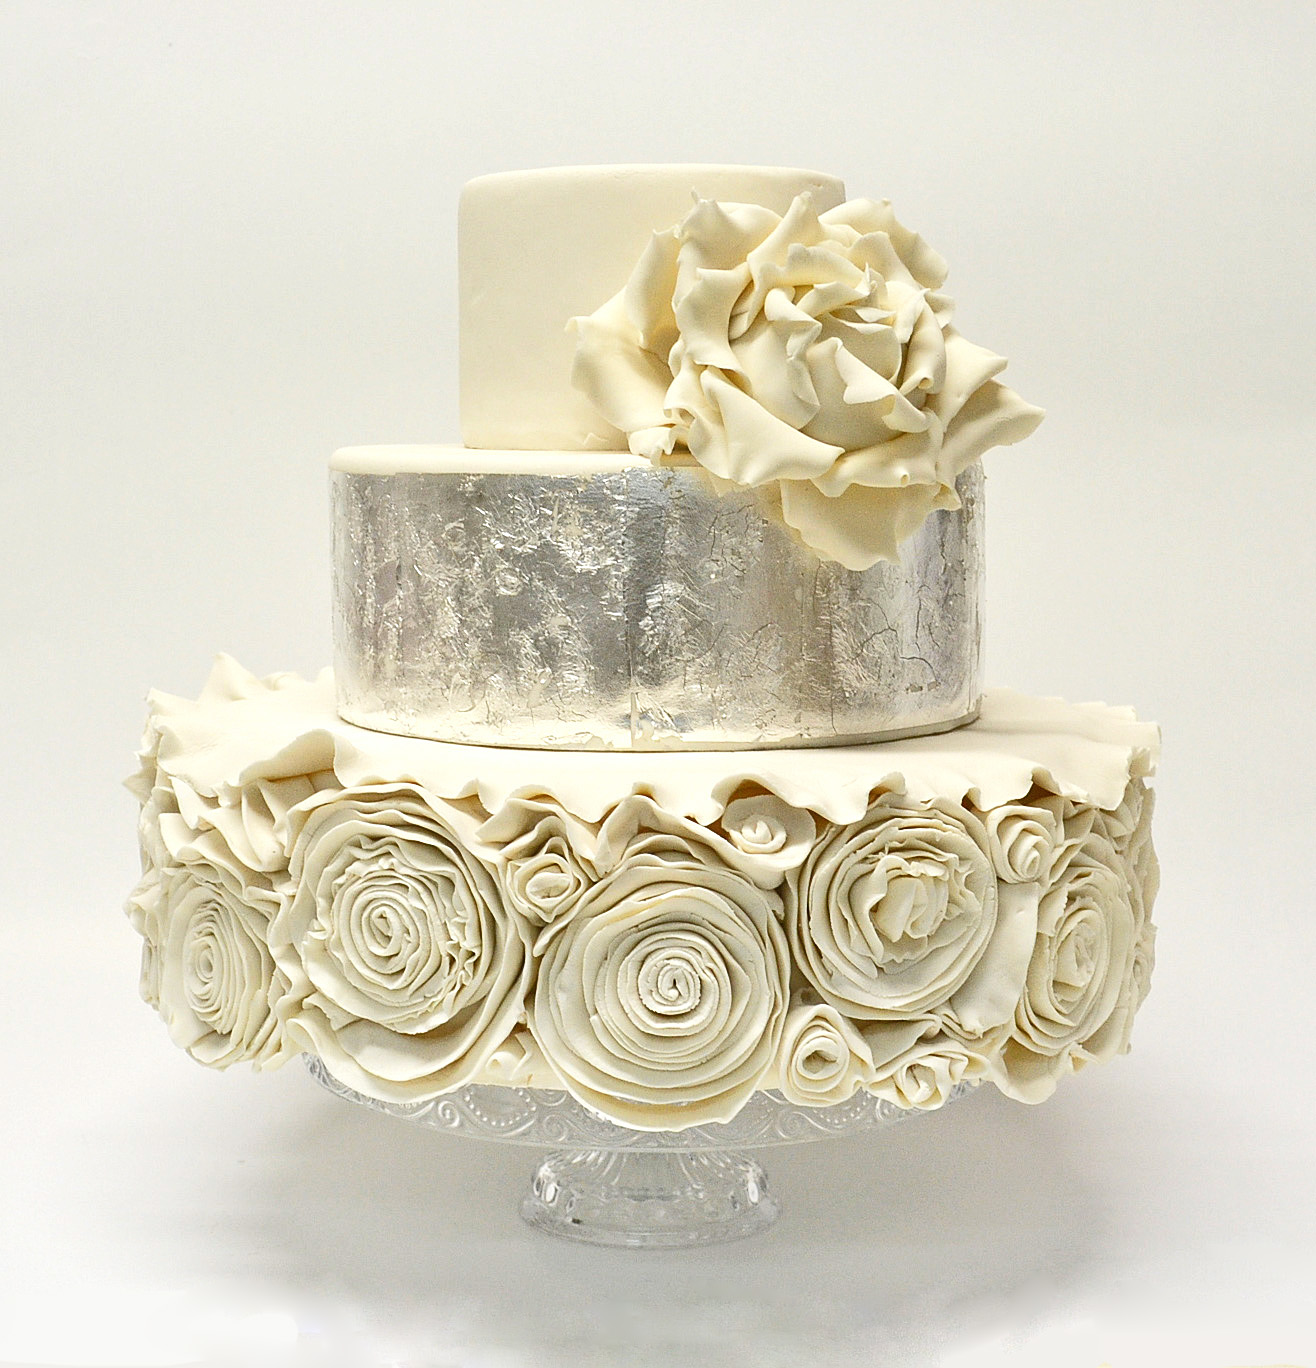 VERY ORNATE WHITE WEDDING CAKE WITH SILVER LEAF